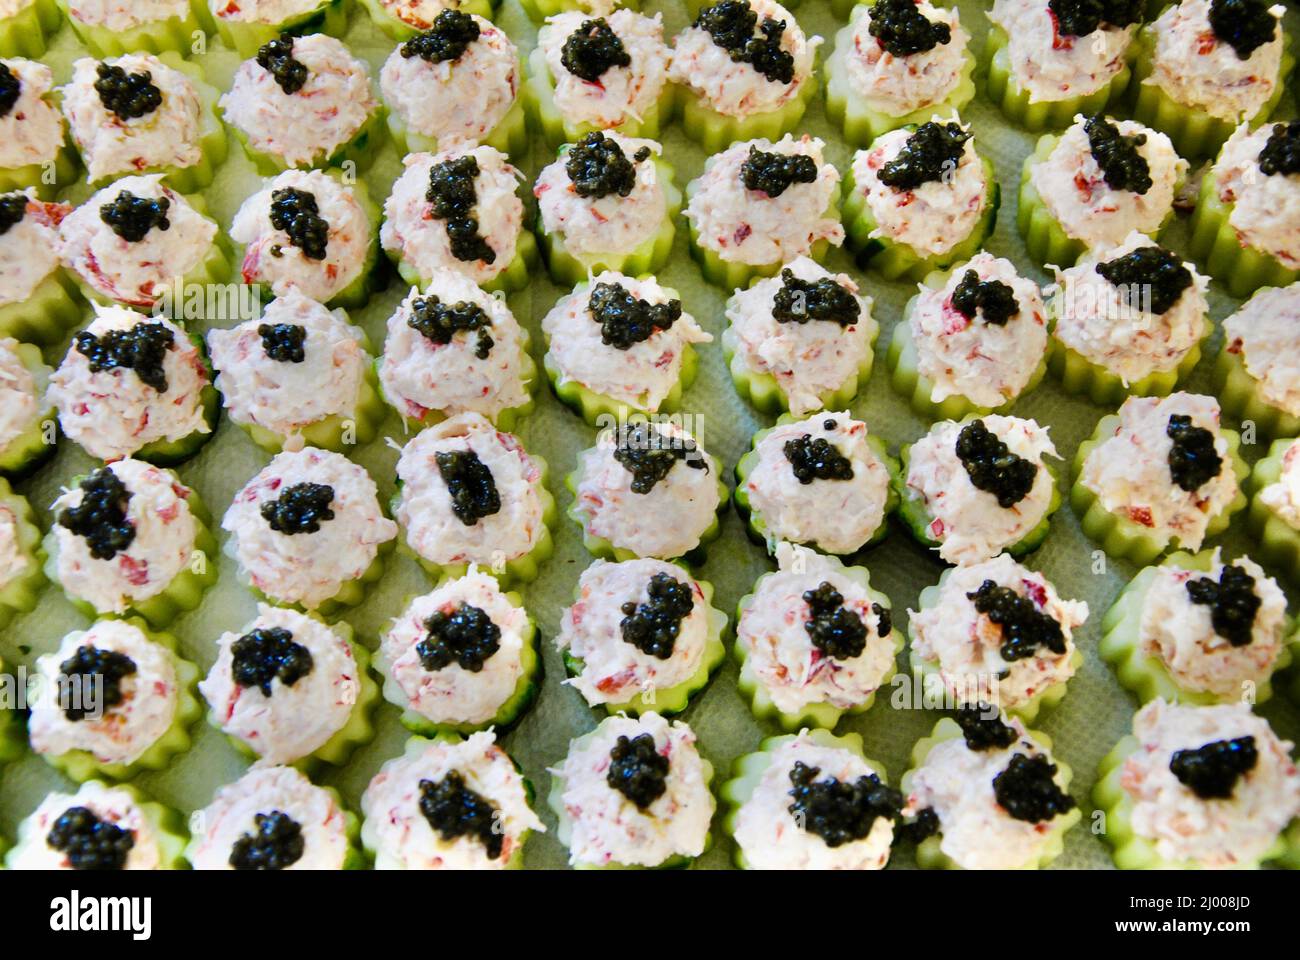 Cucumber cups filled with lobster salad topped with black caviar prepared for a large event Stock Photo